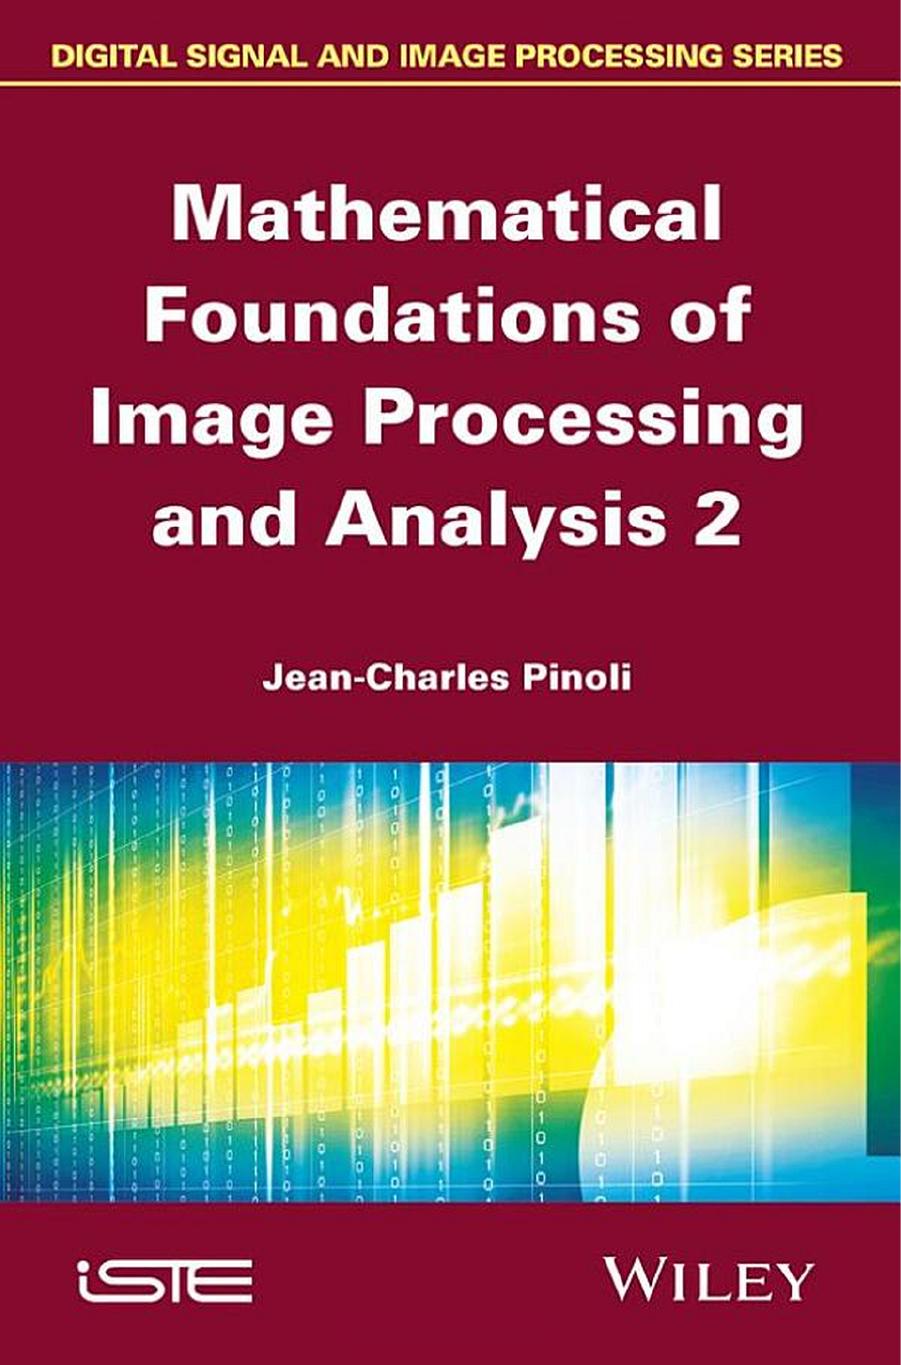 Mathematical Foundations of Image Processing and Analysis - Volume 2